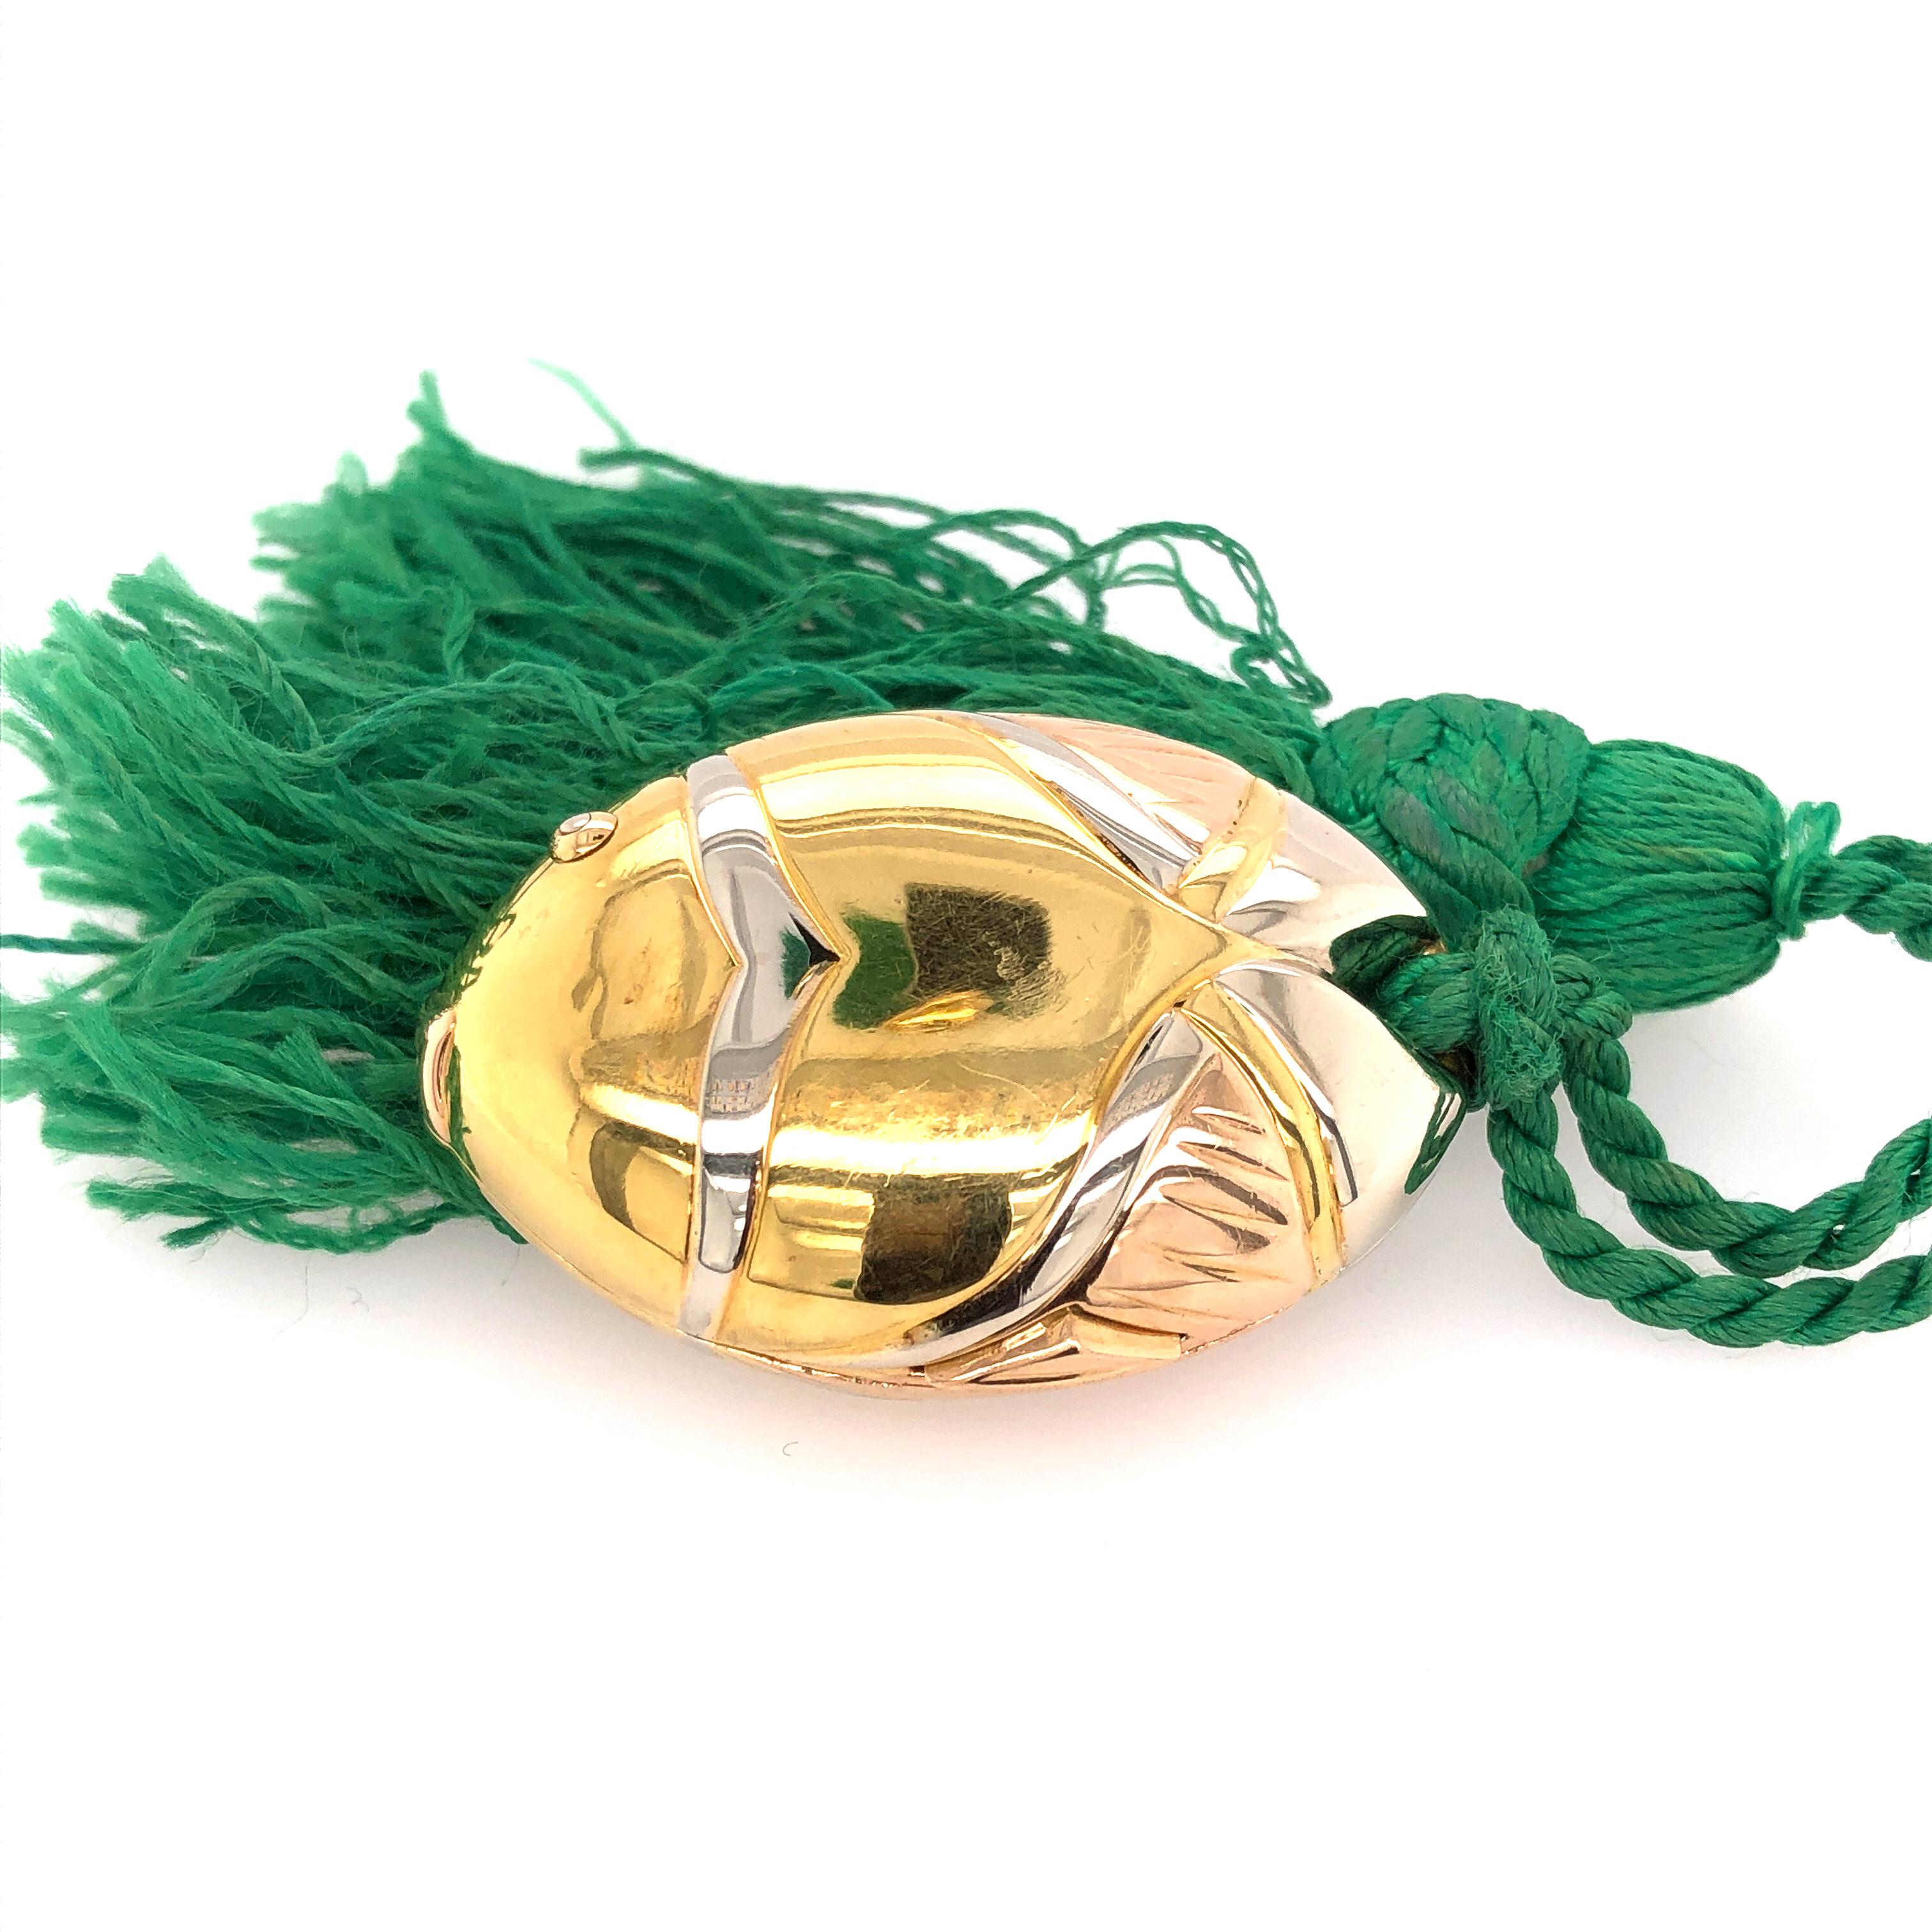 a unique piece this BULGARI fish Pillbox that can be worn as a pendant is a sure conversation starter. 18K yellow gold with a green tassel that serves as the tail. 

From the Skibell Estate Collection

Stamped: 750 BVLGARI 2337AL
